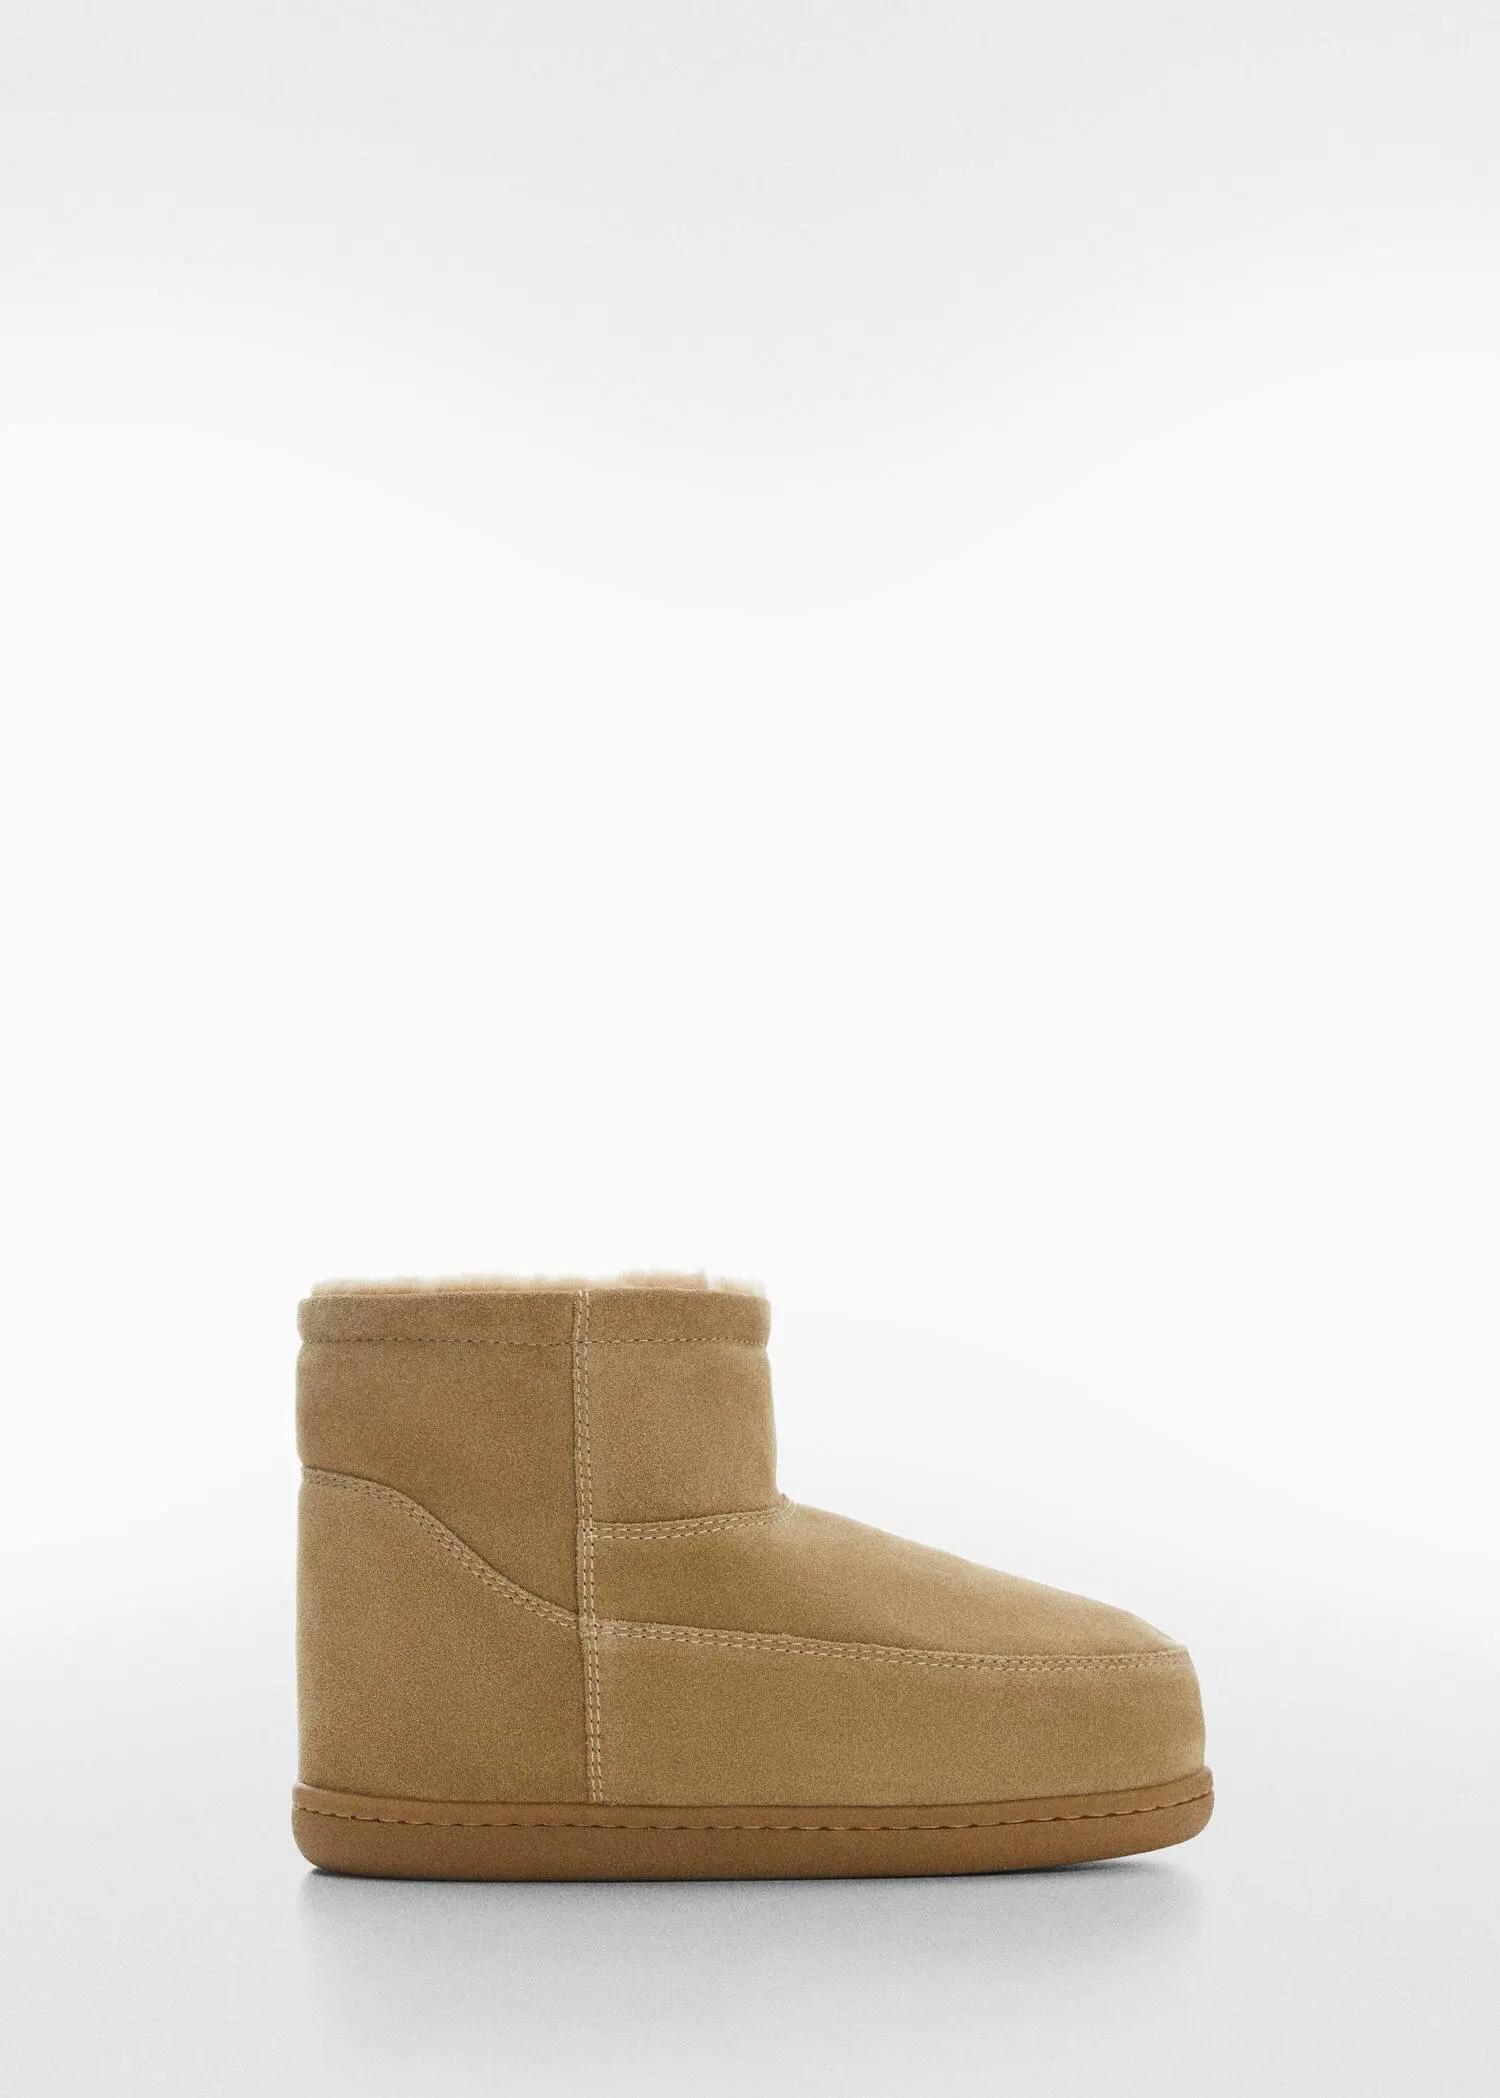 Mango Shearling-lined ankle boots. 3